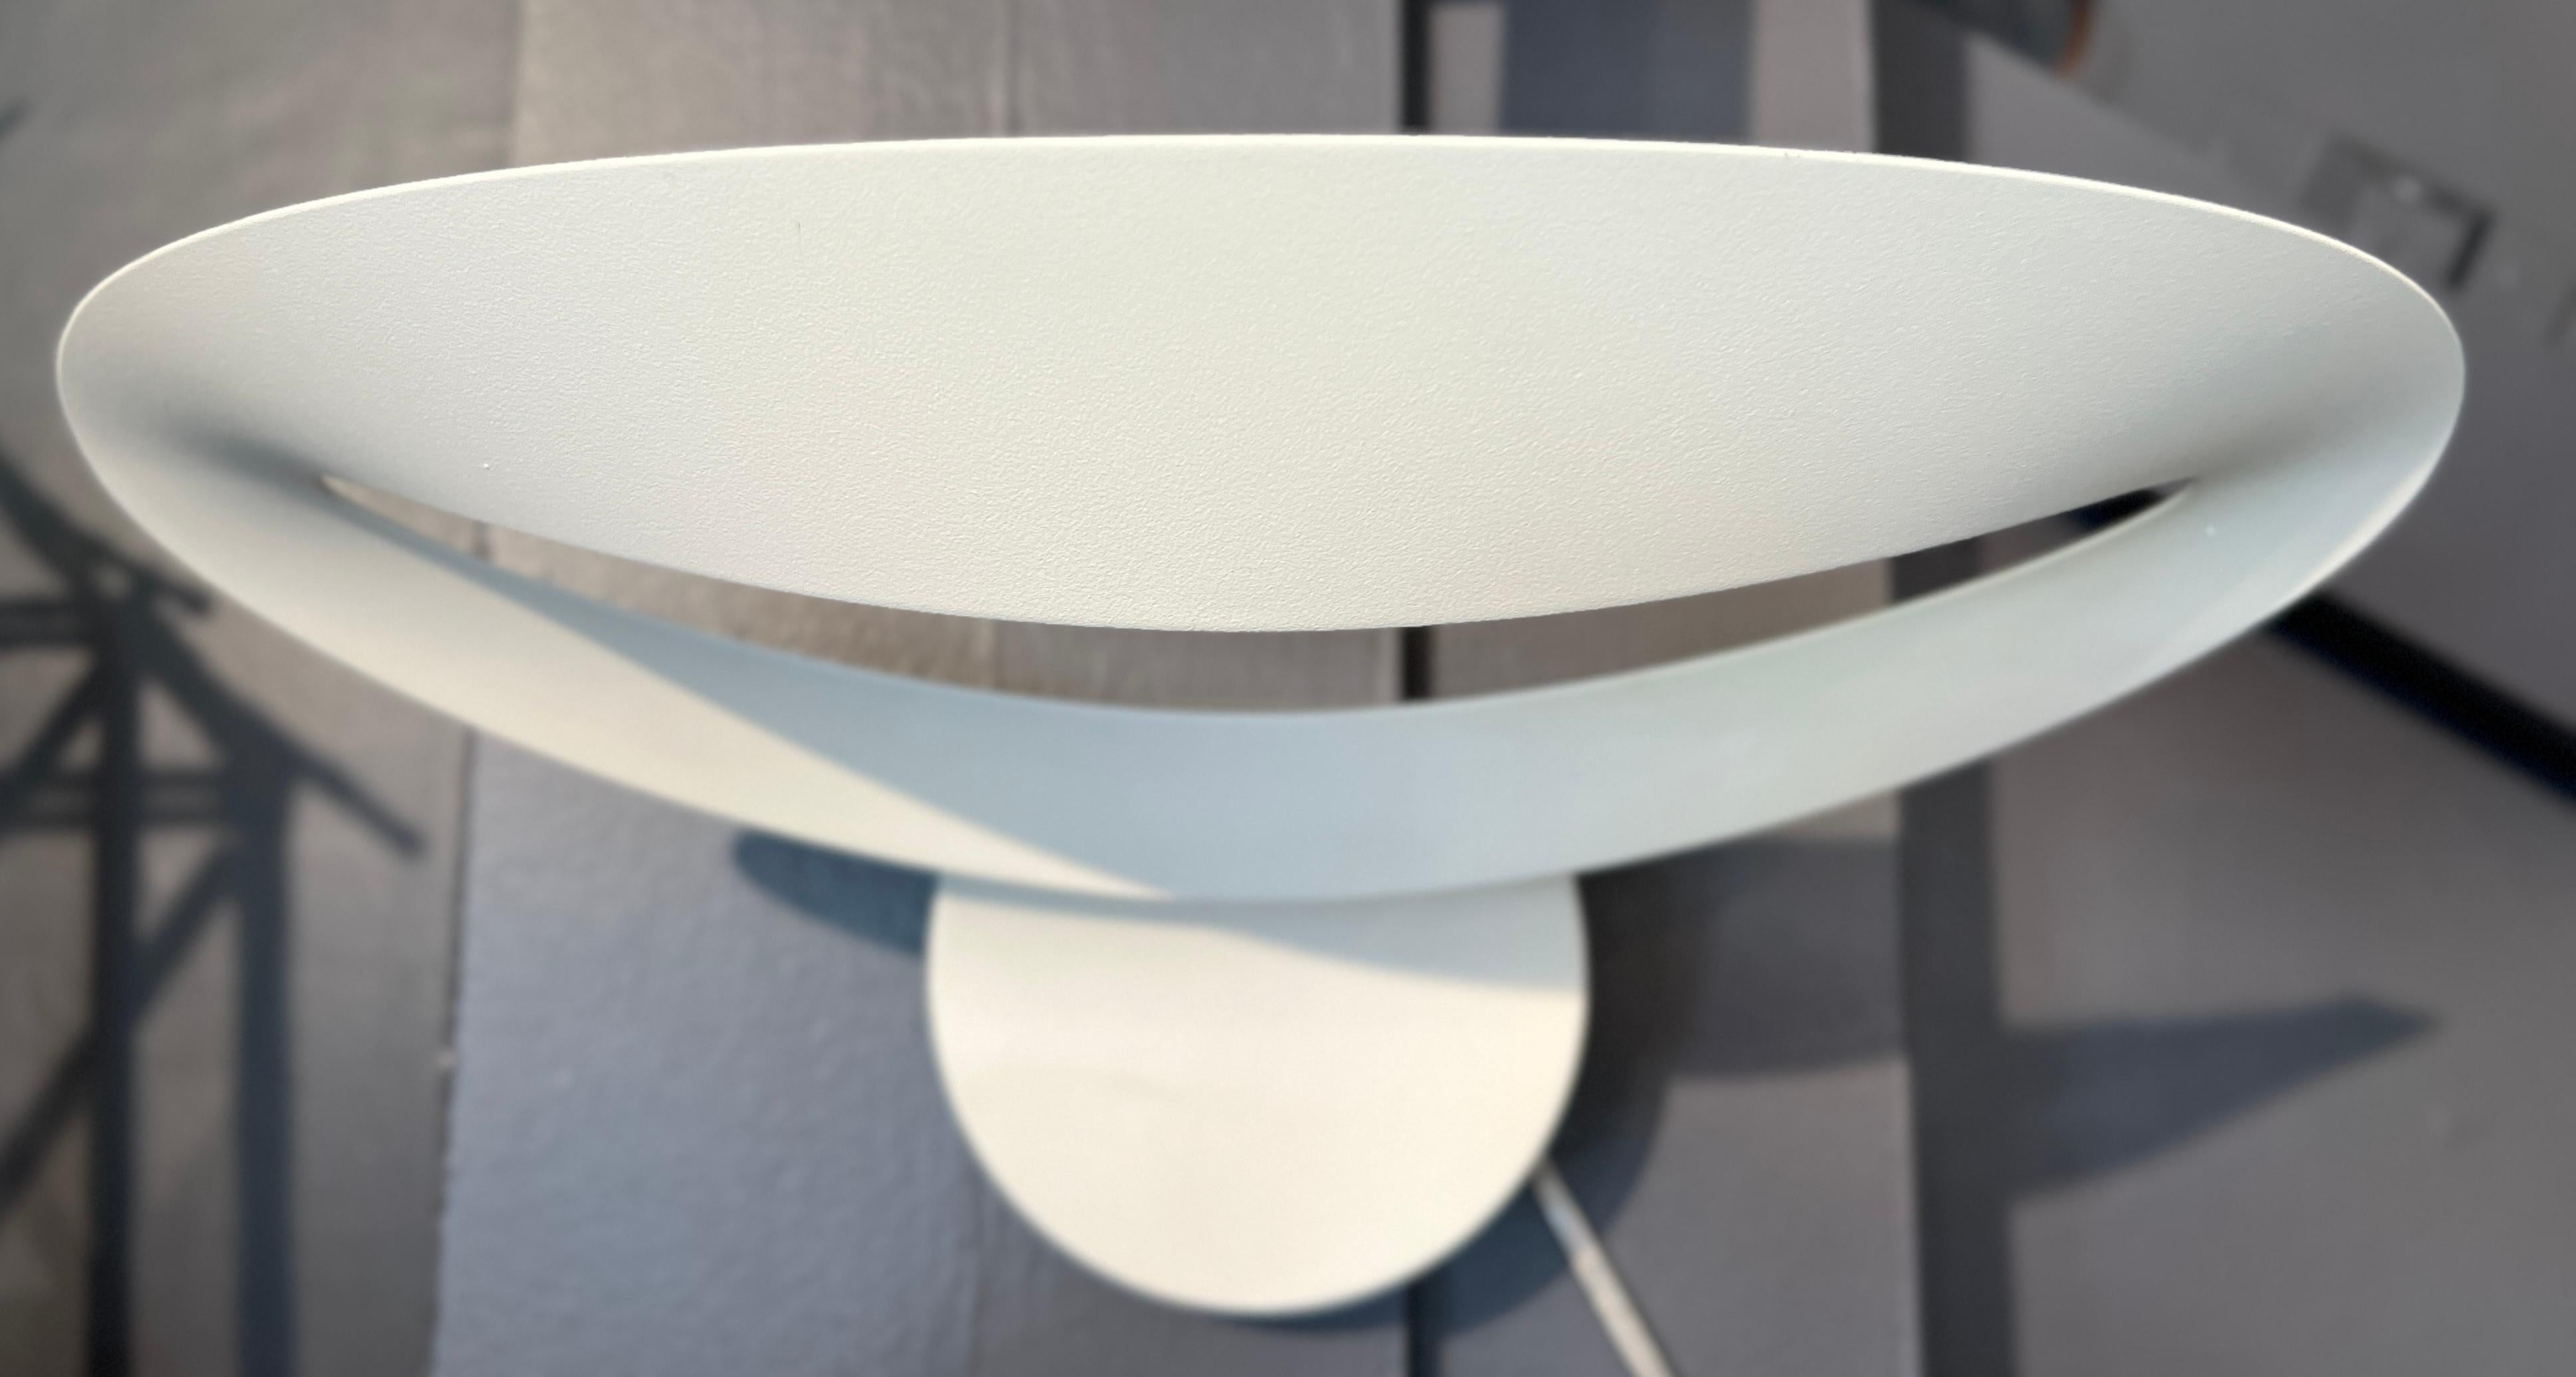 The Mesmeri Wall Sconce is a beautiful sculptural wall lamp designed by Eric Solé for Artemide in Italy. It has a curved aluminum design that hides its bright halogen light. You can adjust its brightness with a separate wall dimmer

Dimensions: 9